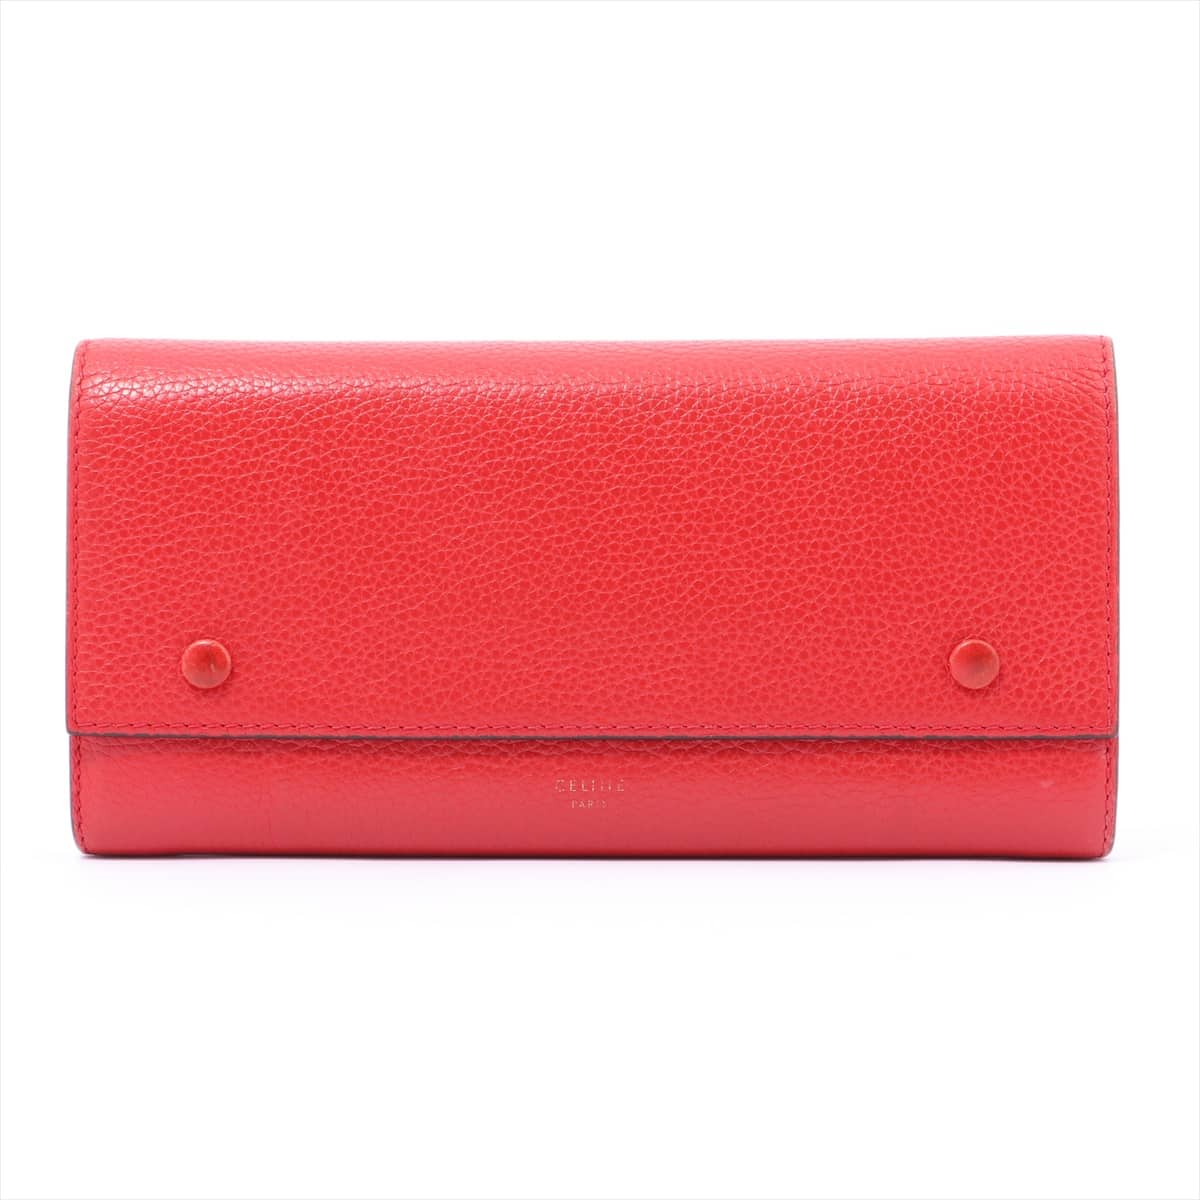 CELINE Large Flap Multi Function Leather Wallet Red